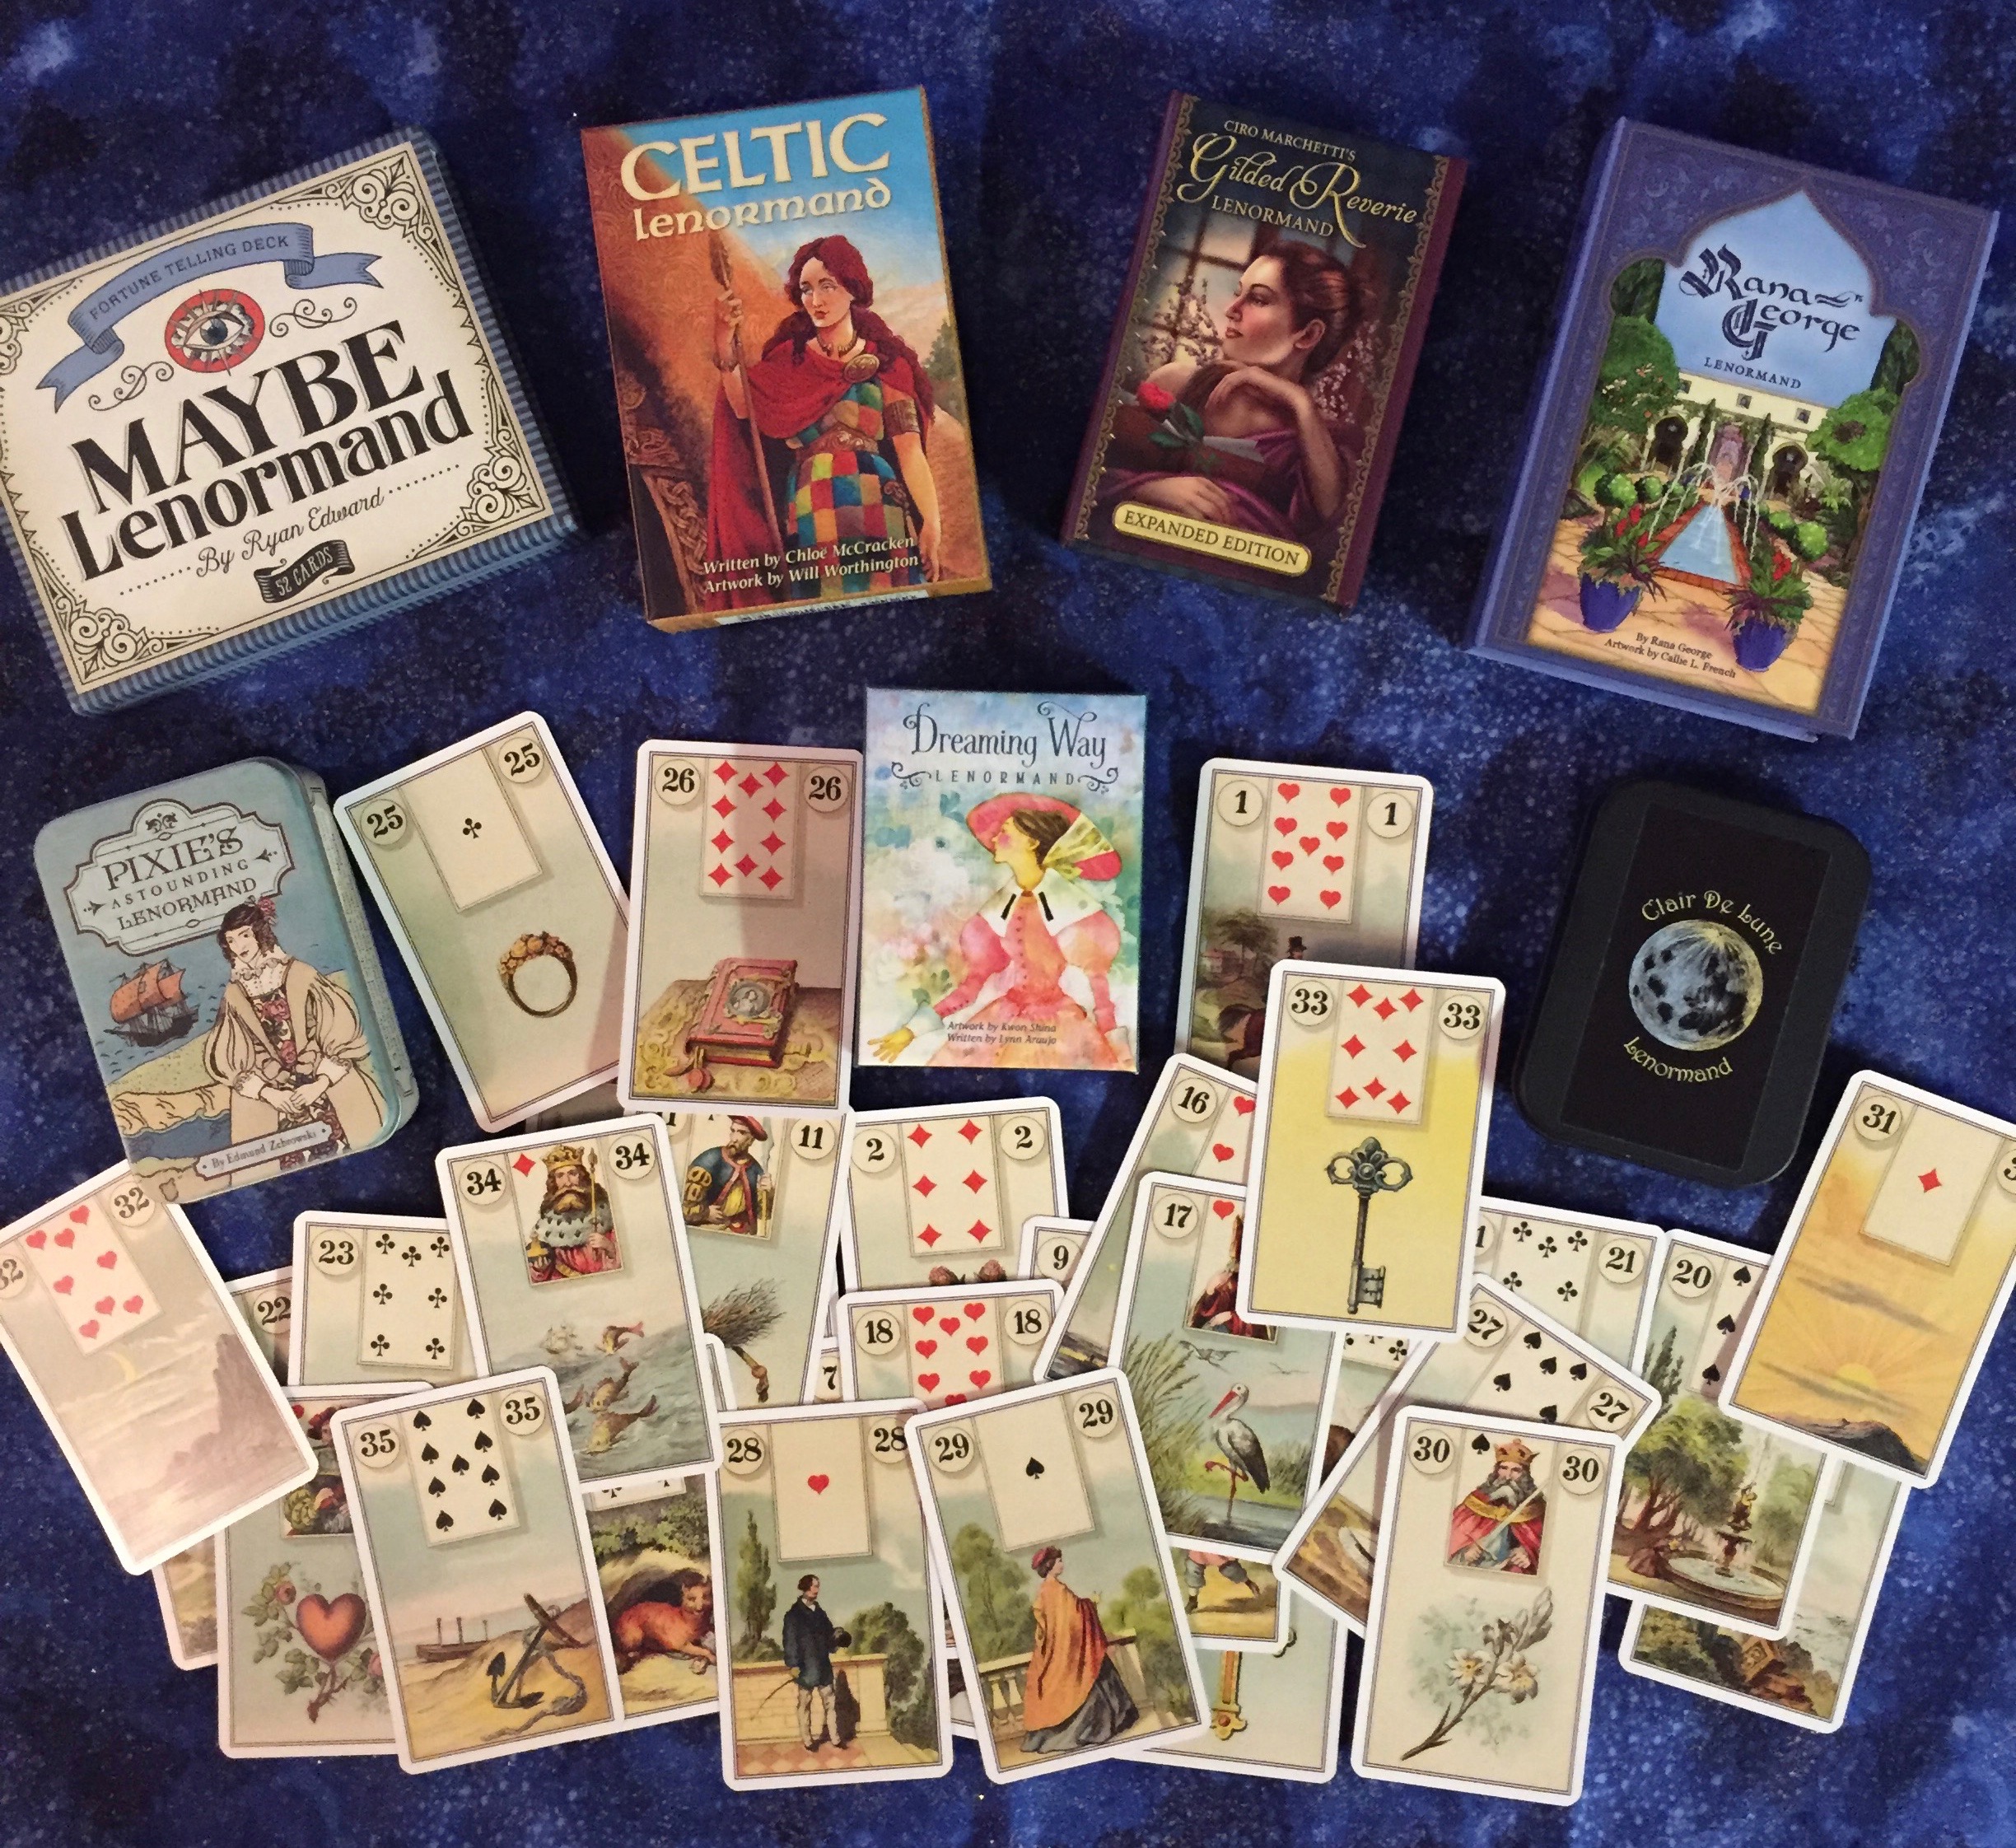 A spread of Lenormand divination cards